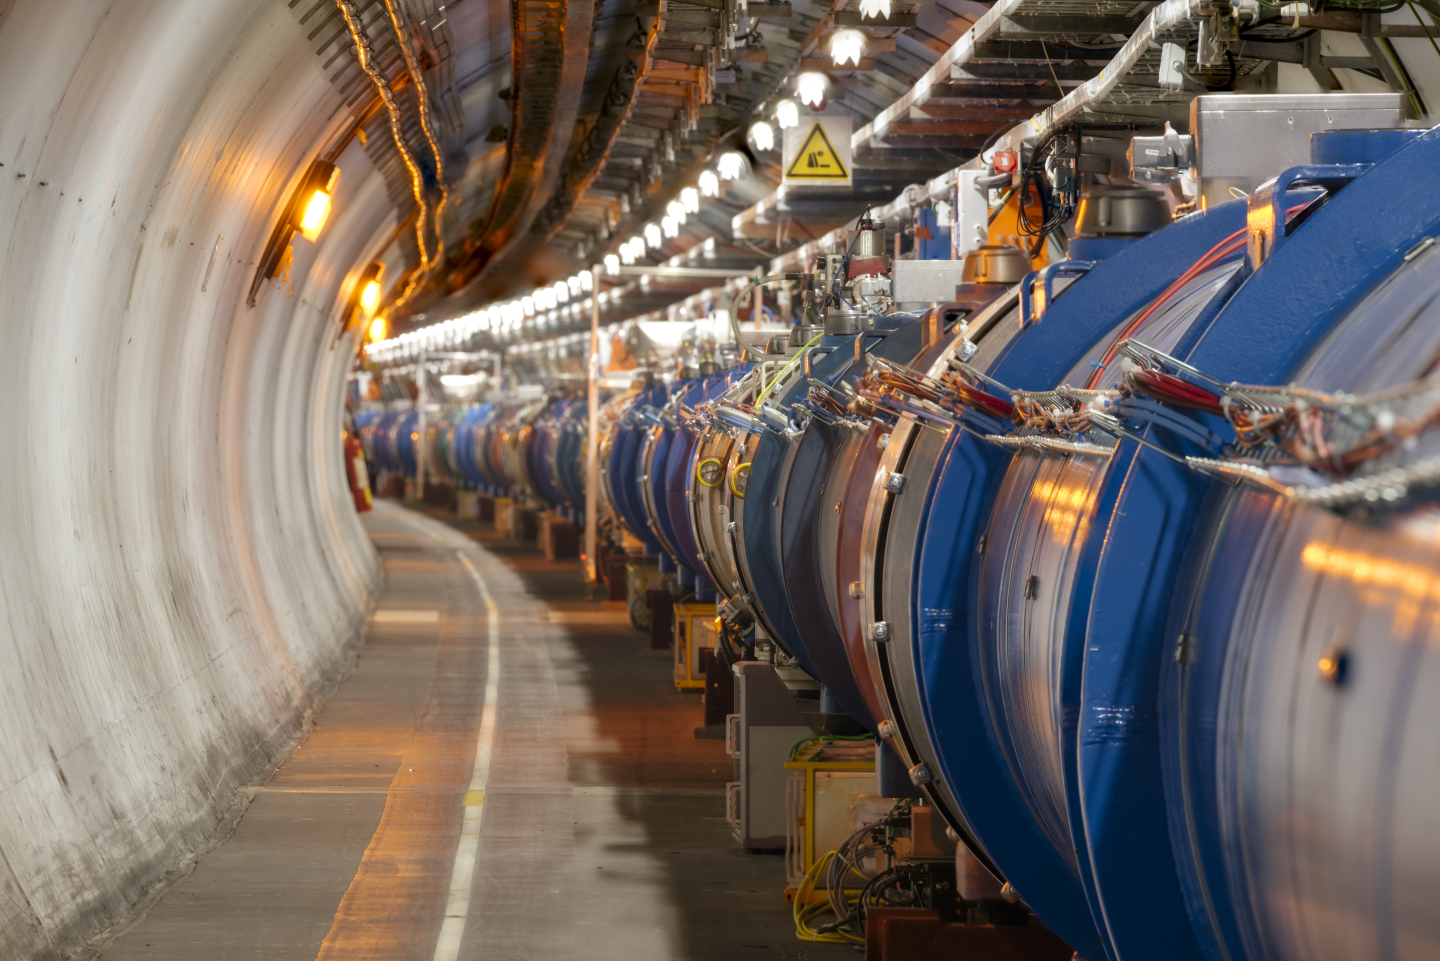 View of the Large Hadron Collider, with its huge superconducting magnets.